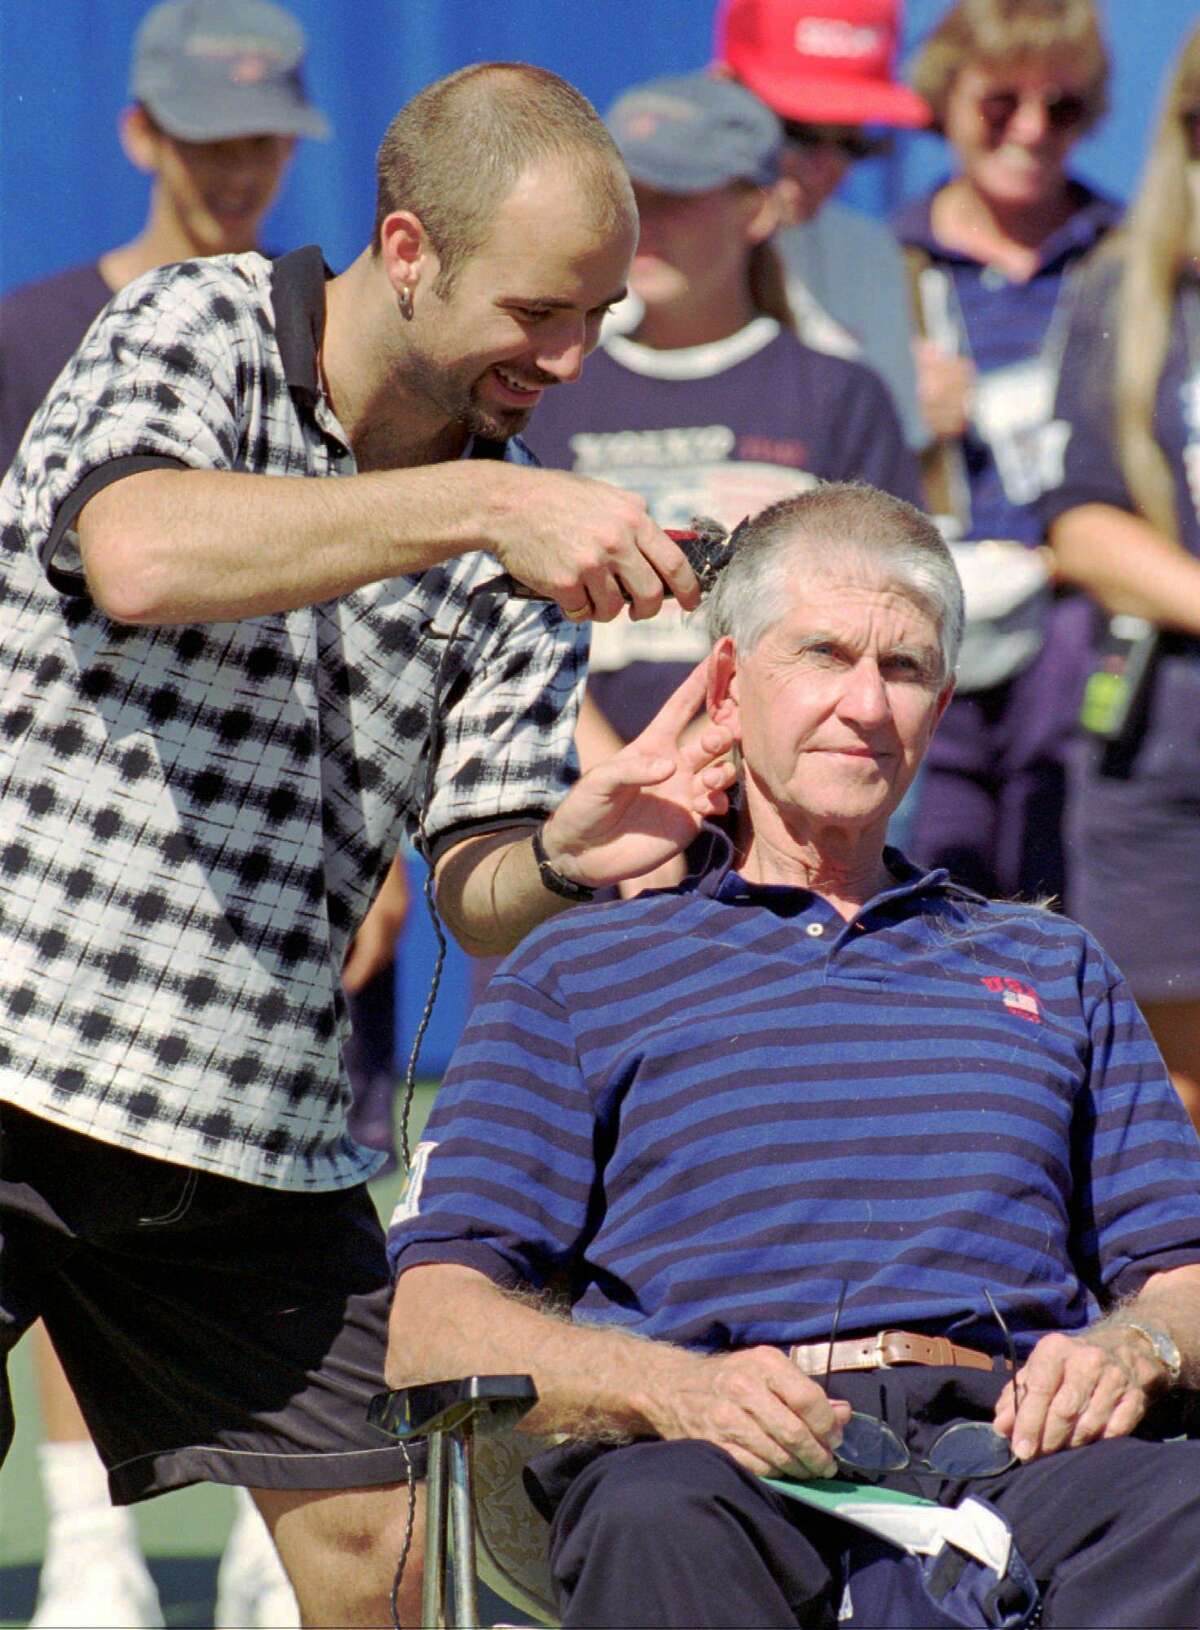 Andre Agassi, left, shaves Volvo International Tennis Tournament Director Jim Westhall's head after Agassi won the Volvo International singles title in New Haven, Conn., Sunday, Aug. 20, 1995, by defeating Richard Krajicek of the Netherlands 3-6, 7-6(7-2), 6-3. Agassi made a bet with Westhall that if he won the tournament Westhall, who is known for having a large head of hair, would let him shave Westhall's head. (AP Photo/John Dunn)